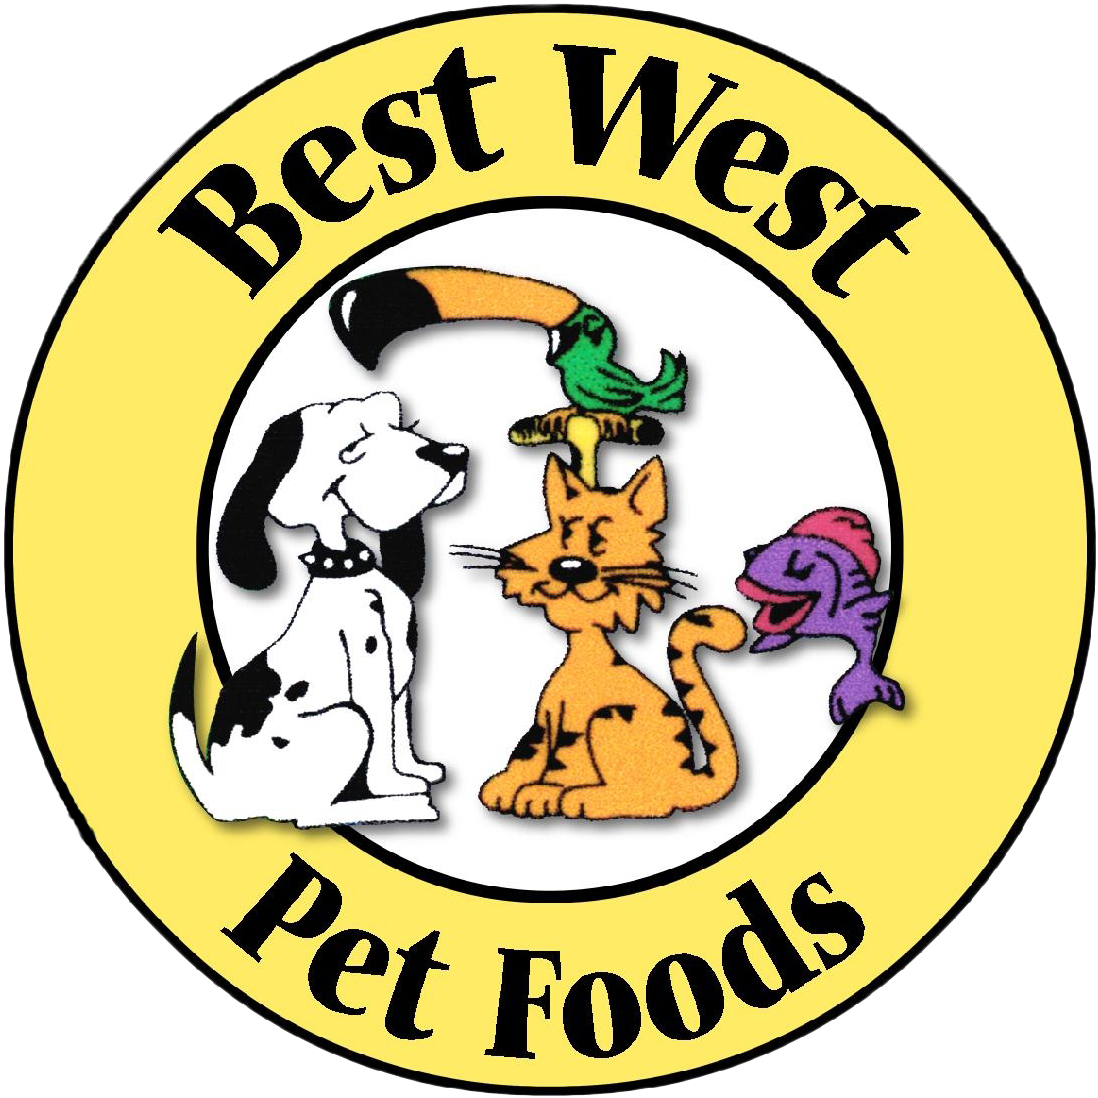 Our Sponsors Best West Pet Foods - Approved Vendor 22fc75 Nbr Tag, 1-1/2 X 1-1/2in, 151-175, (1110x1138)